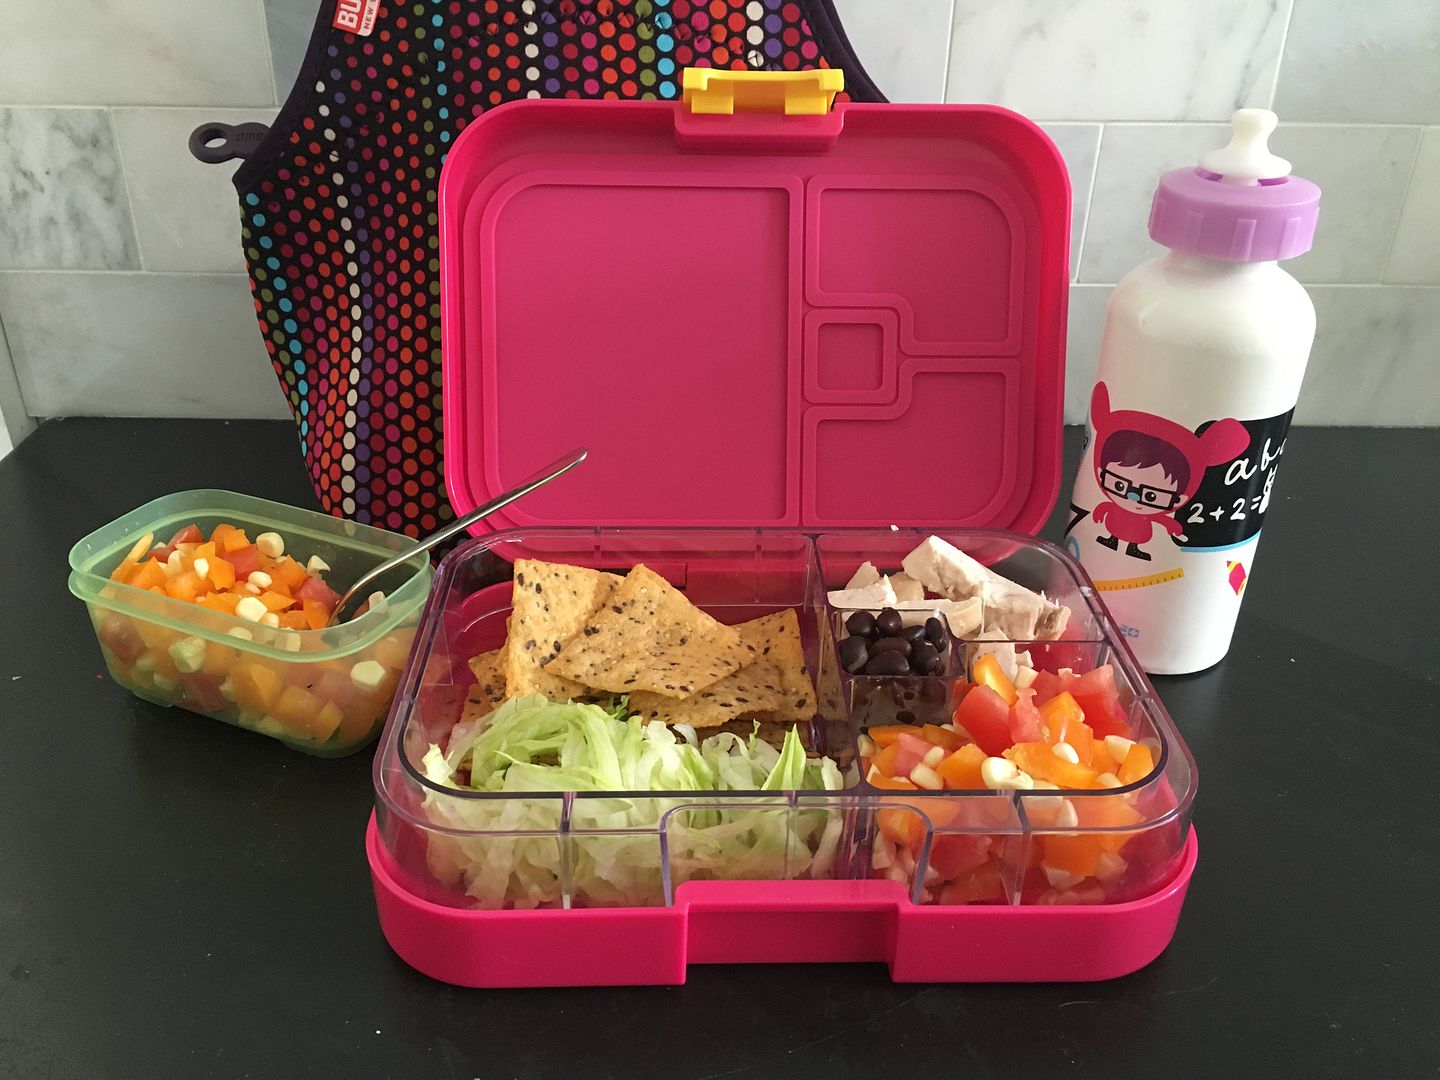 Sandwich alternatives for school lunch: How to make a deconstructed taco that kids love! | coolmomeats.com